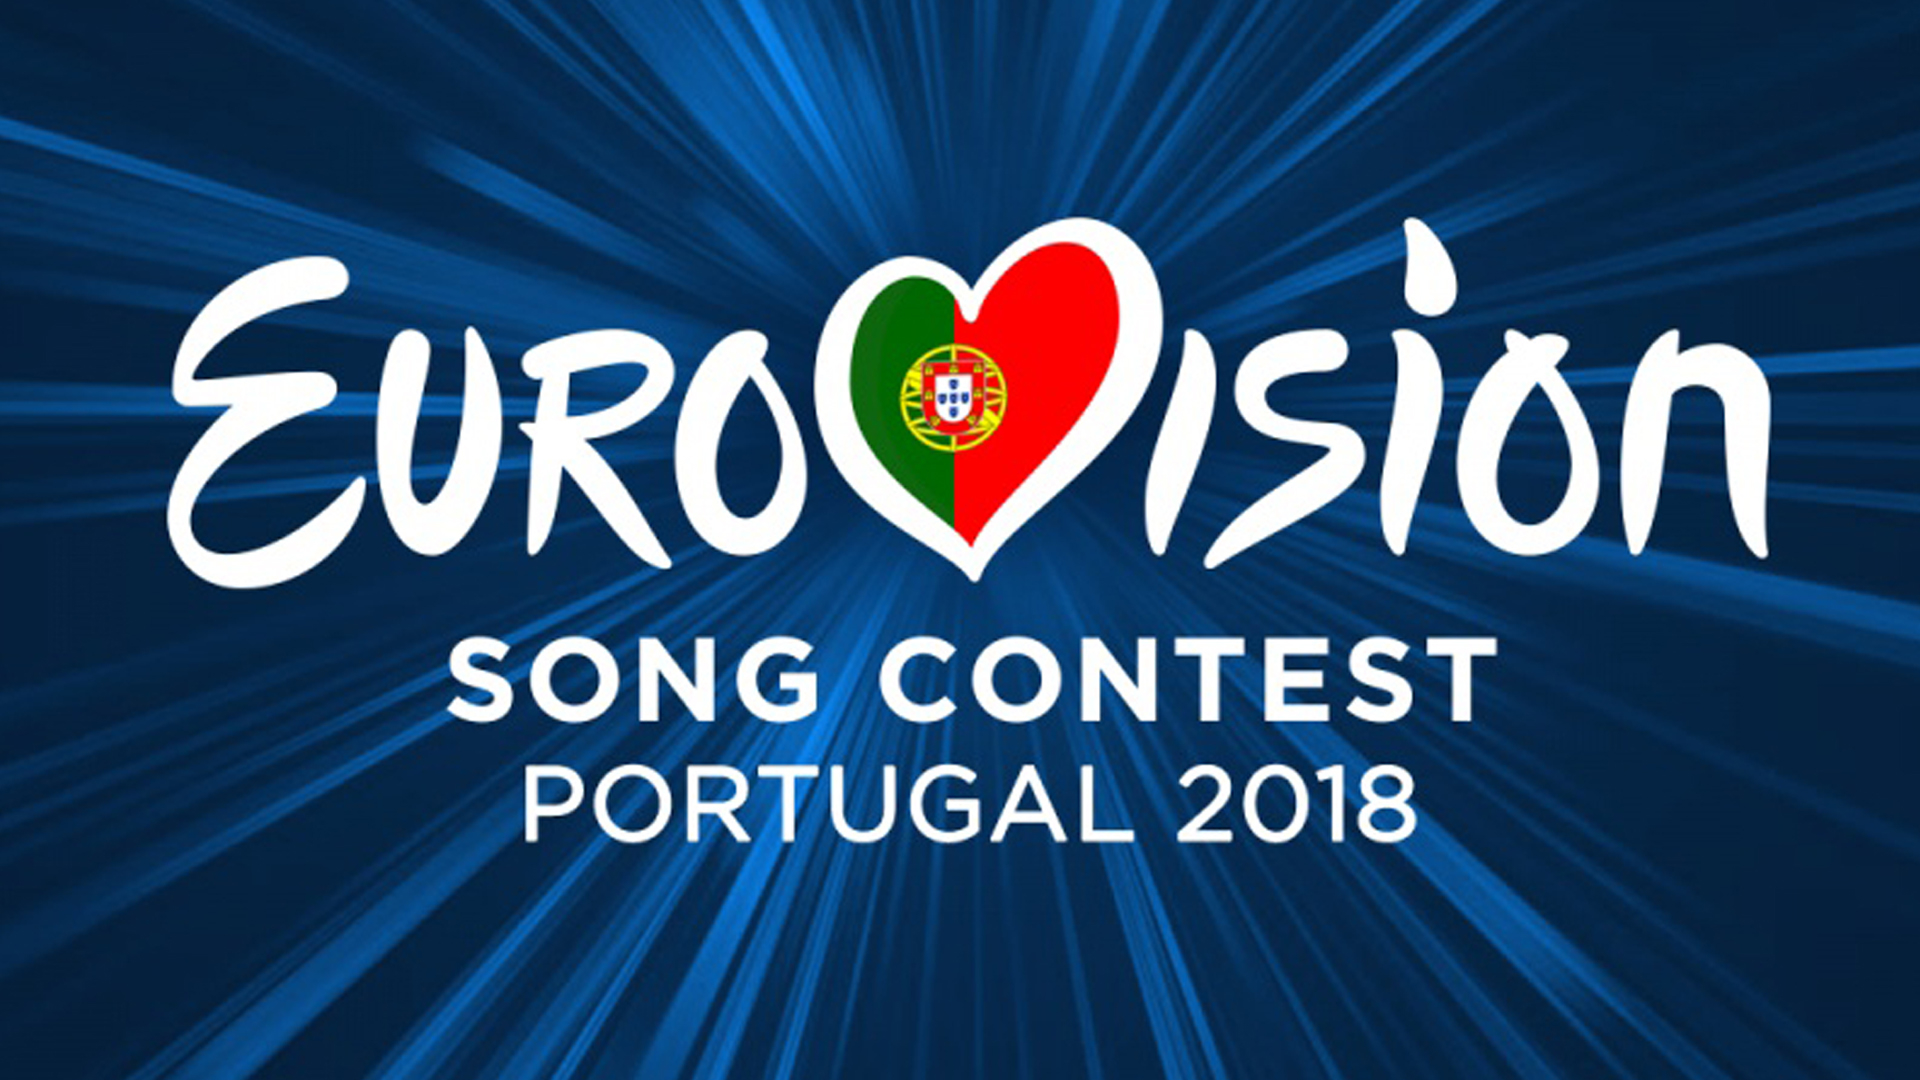 Eurovision Live Streaming Watch The Song Contest Online For